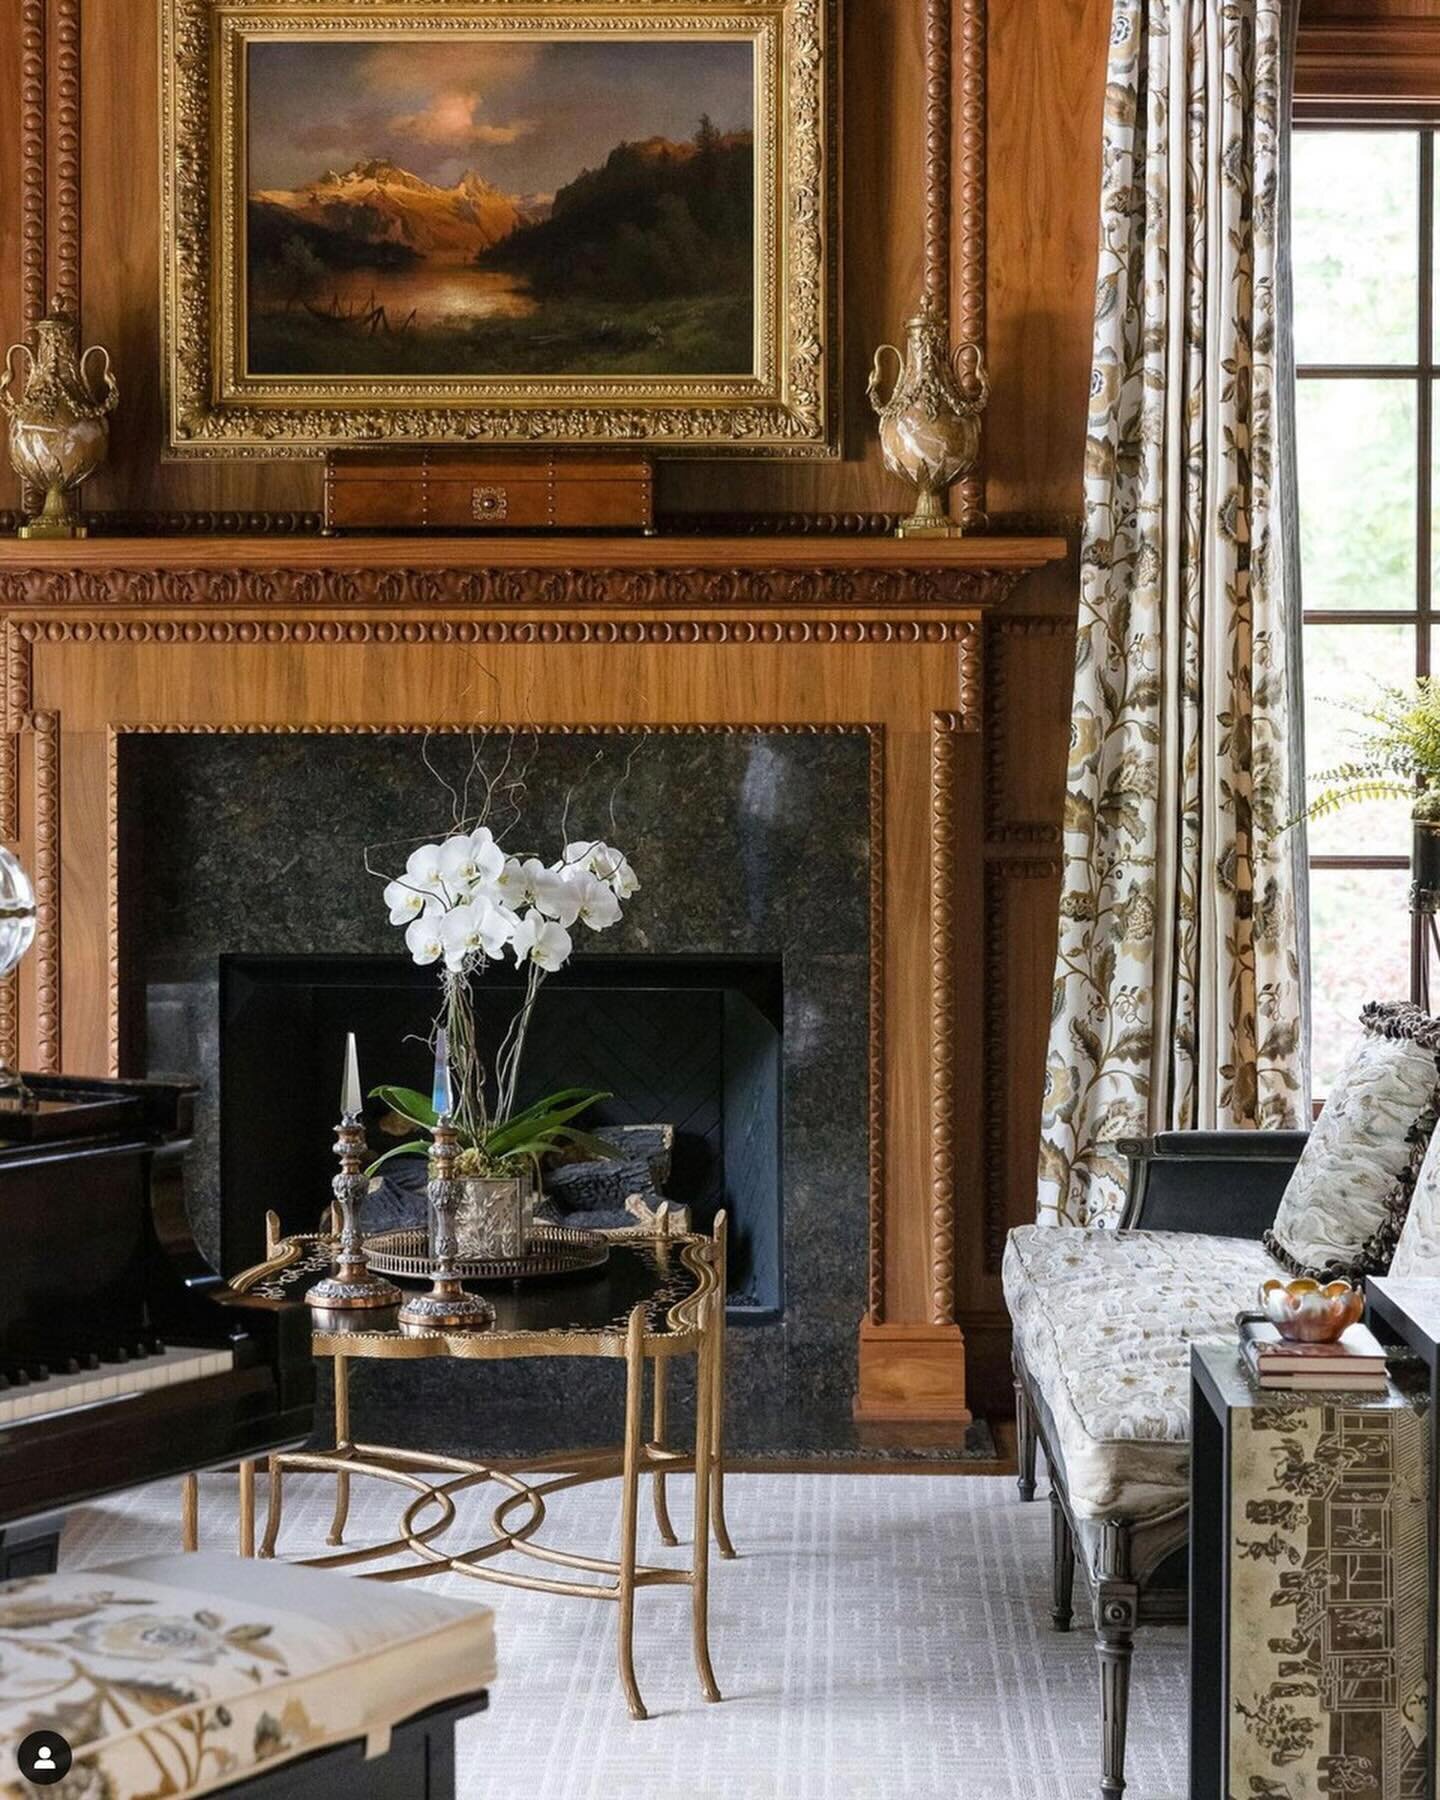 The custom Gertrude curtains and matching piano bench are an absolutely wonderful complement to the rich woods in this design by @ericrossinteriors .

Designed by @suzannetuckerhome and named after Gertrude Jekyll, the grande dame of British garden d